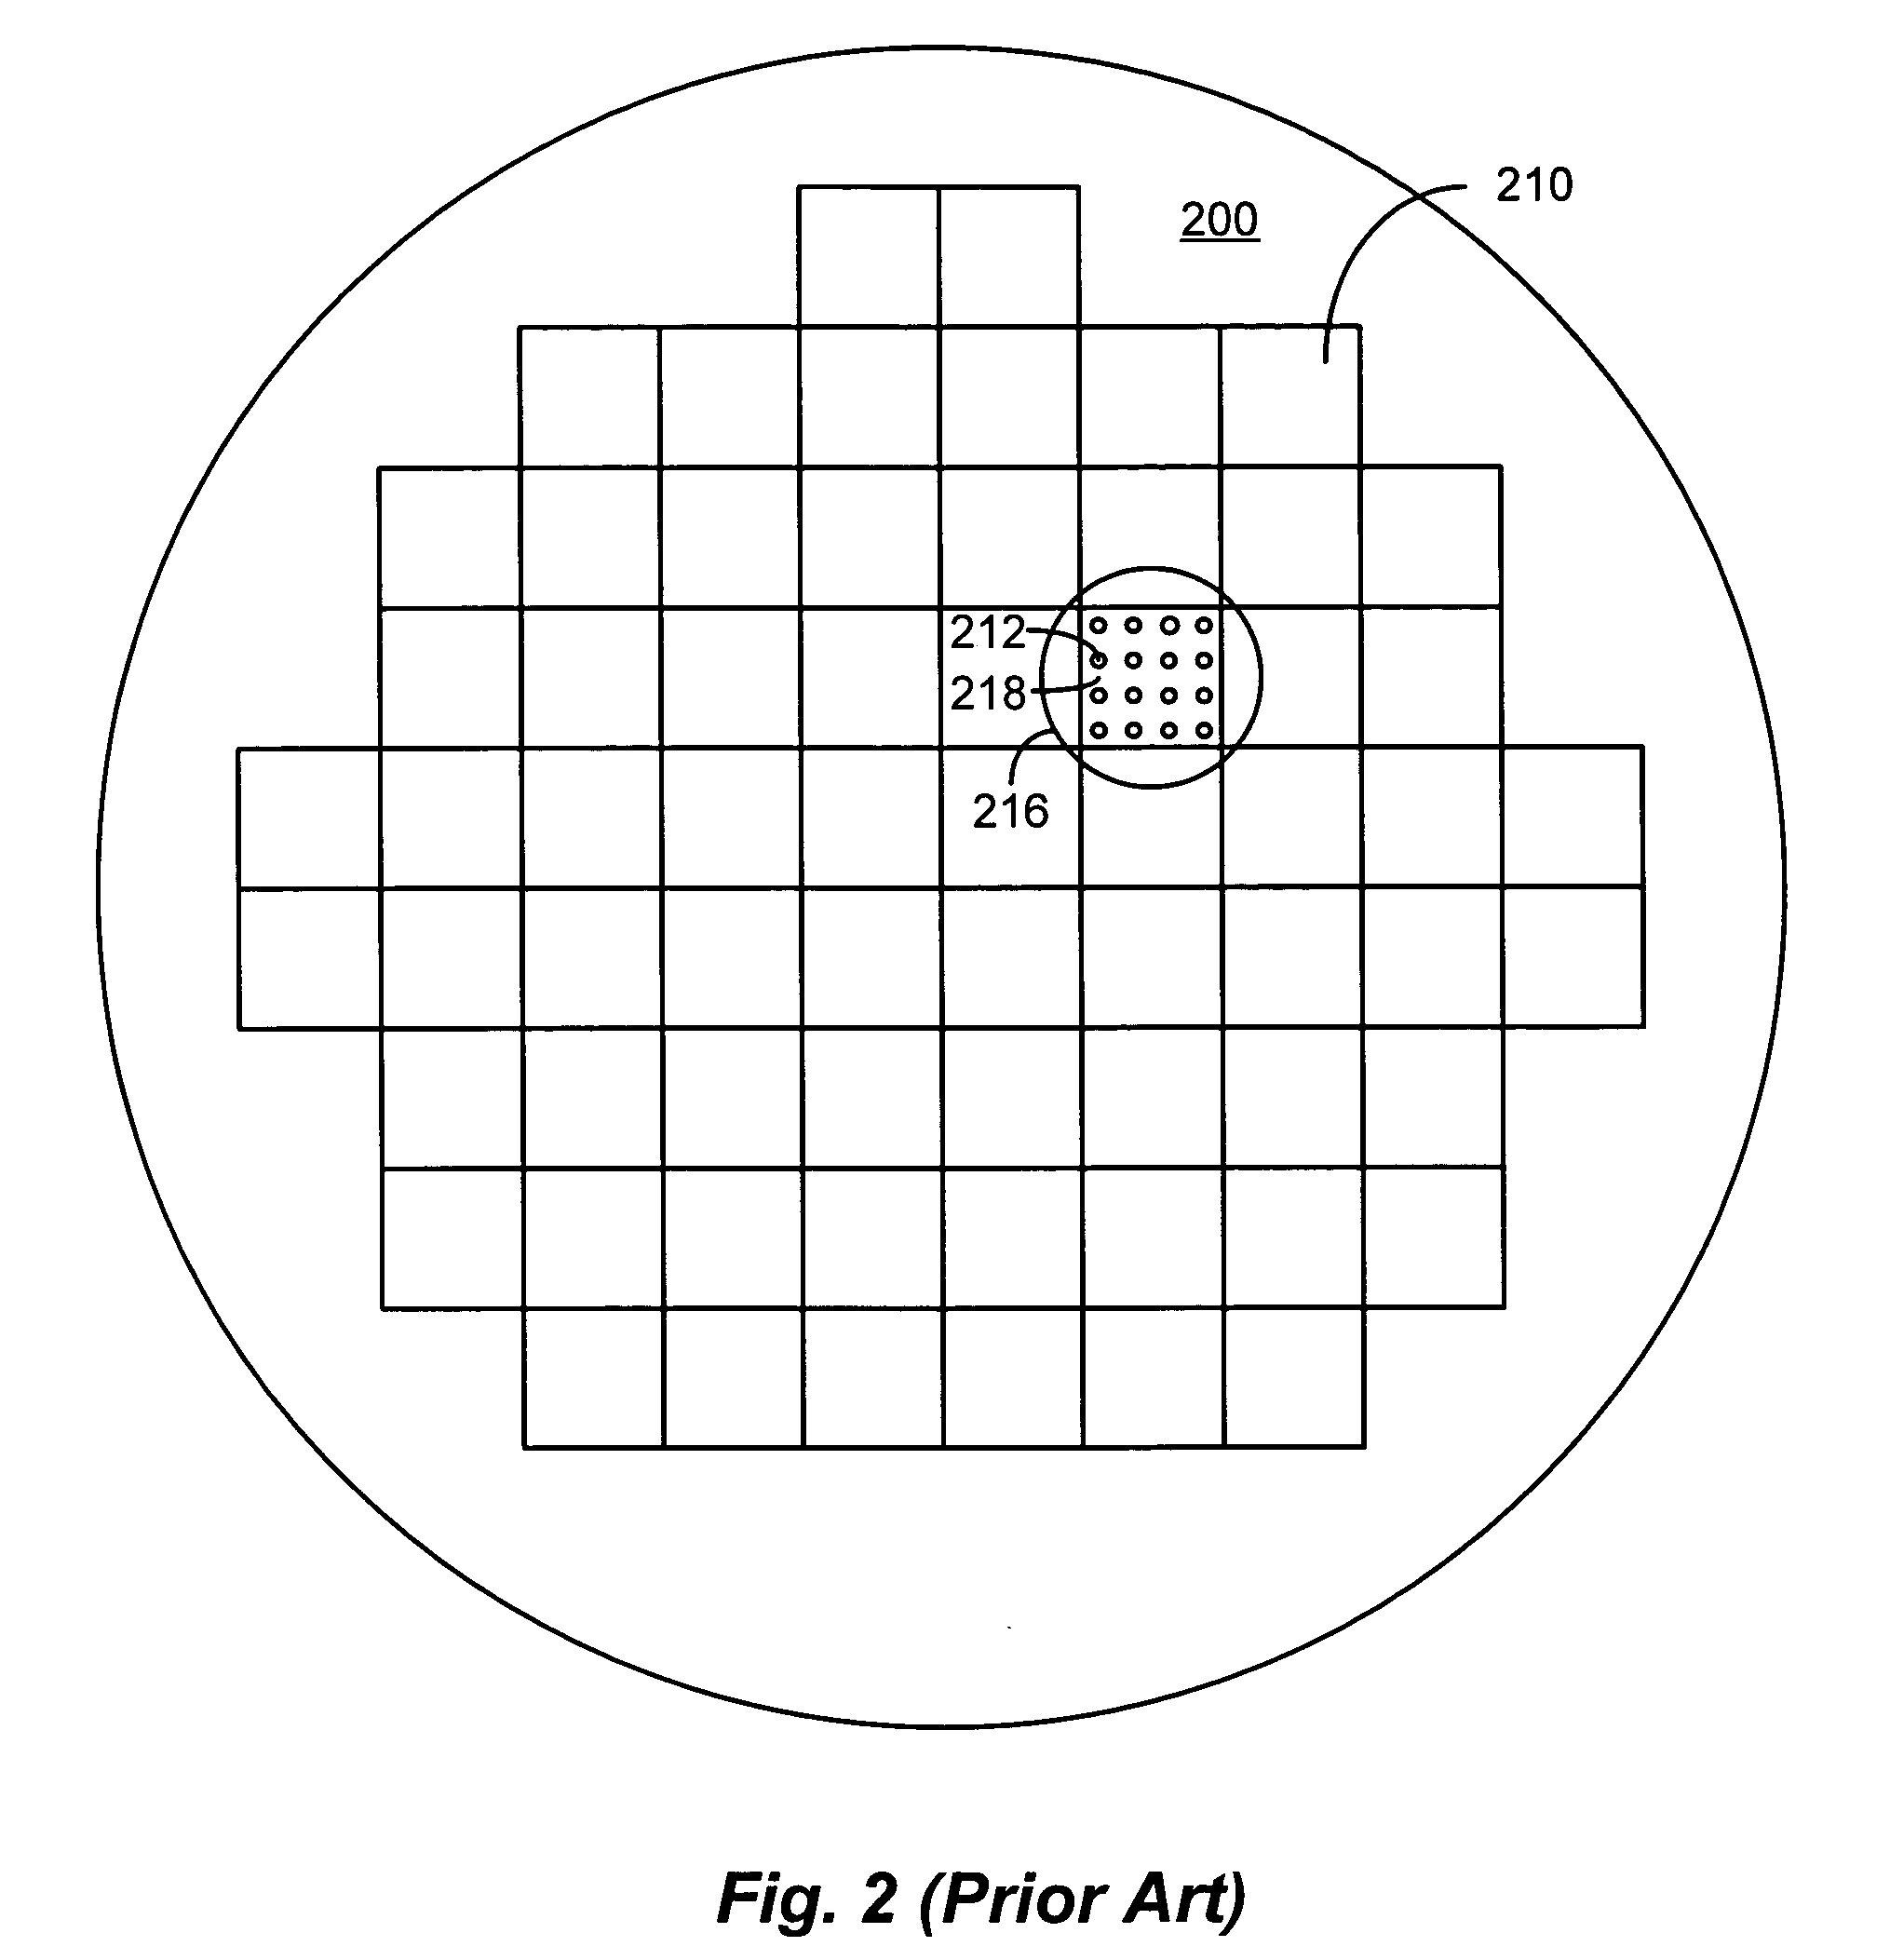 Integrated underfill process for bumped chip assembly